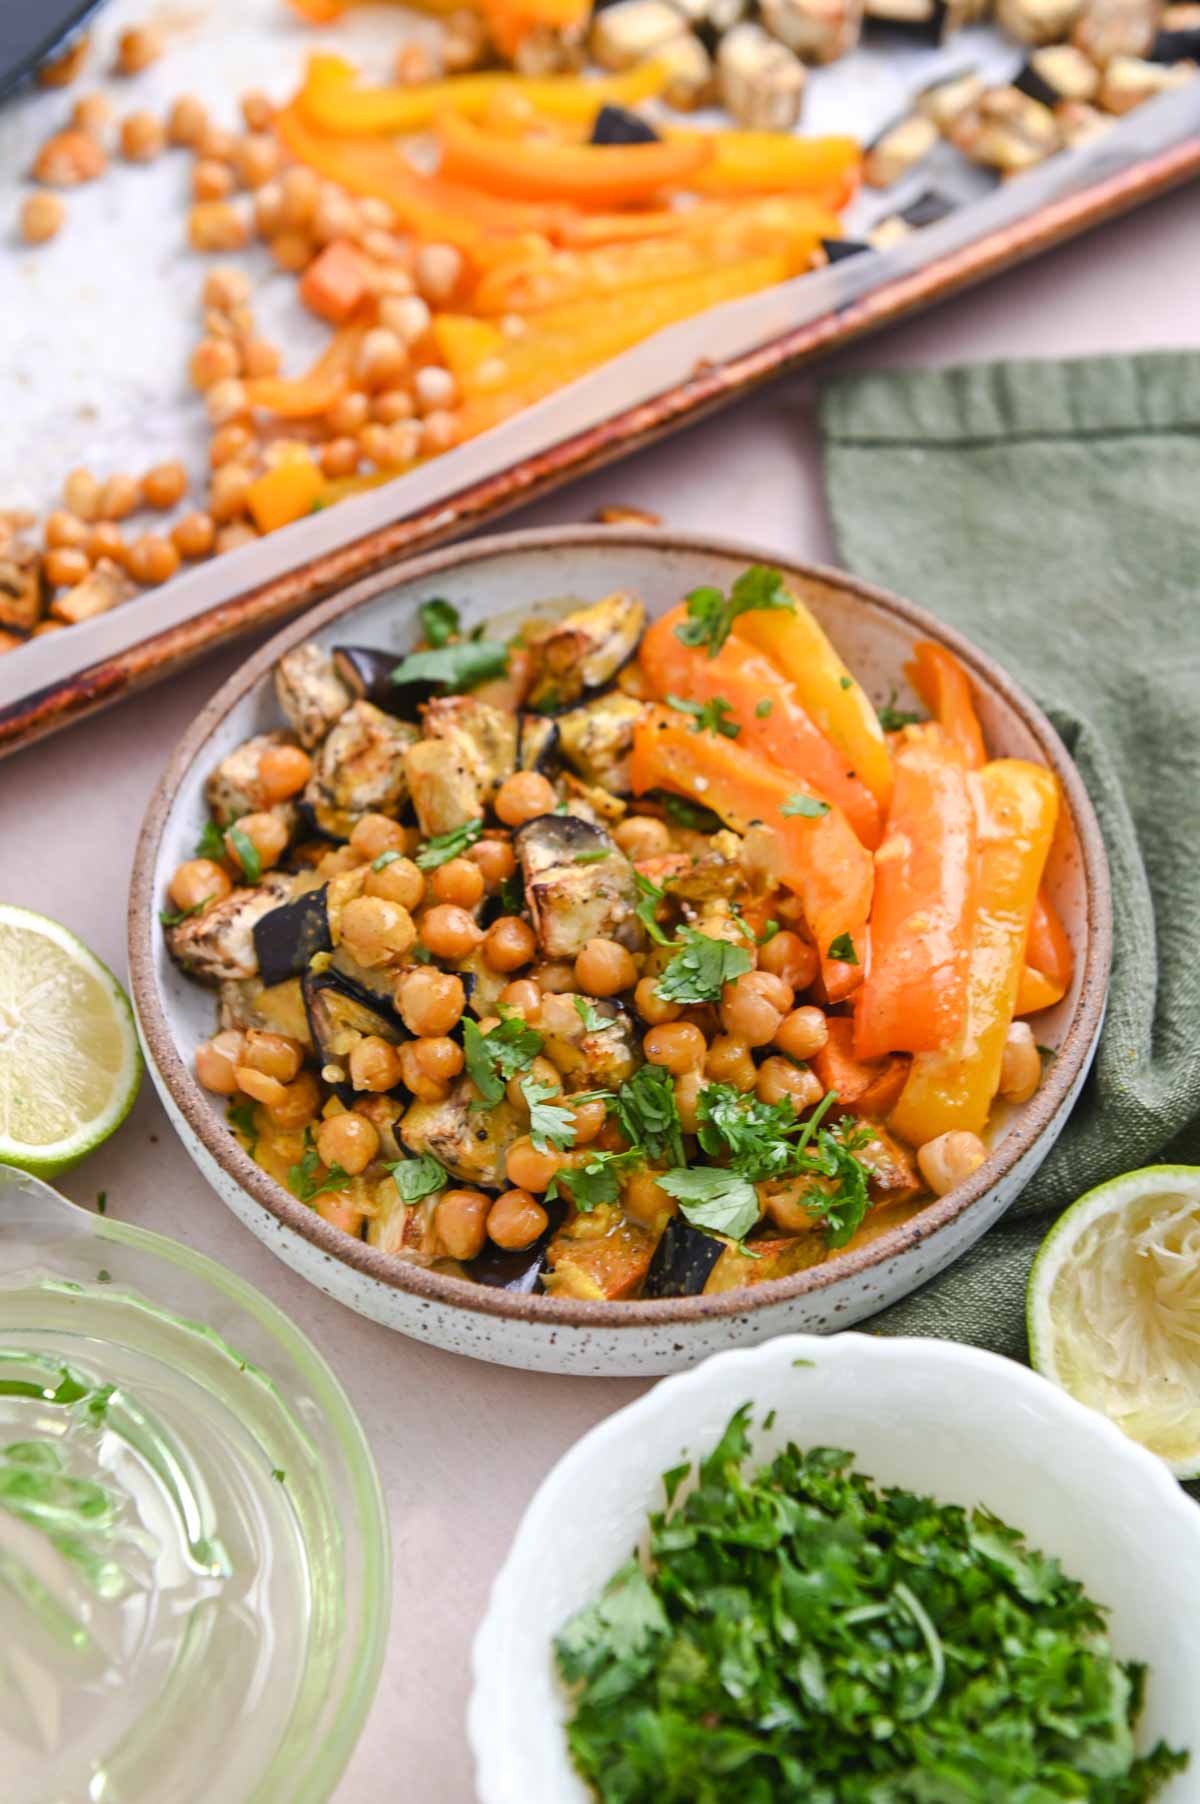 Bowl of chickpeas and roasted vegetables in front of a sheet pan.